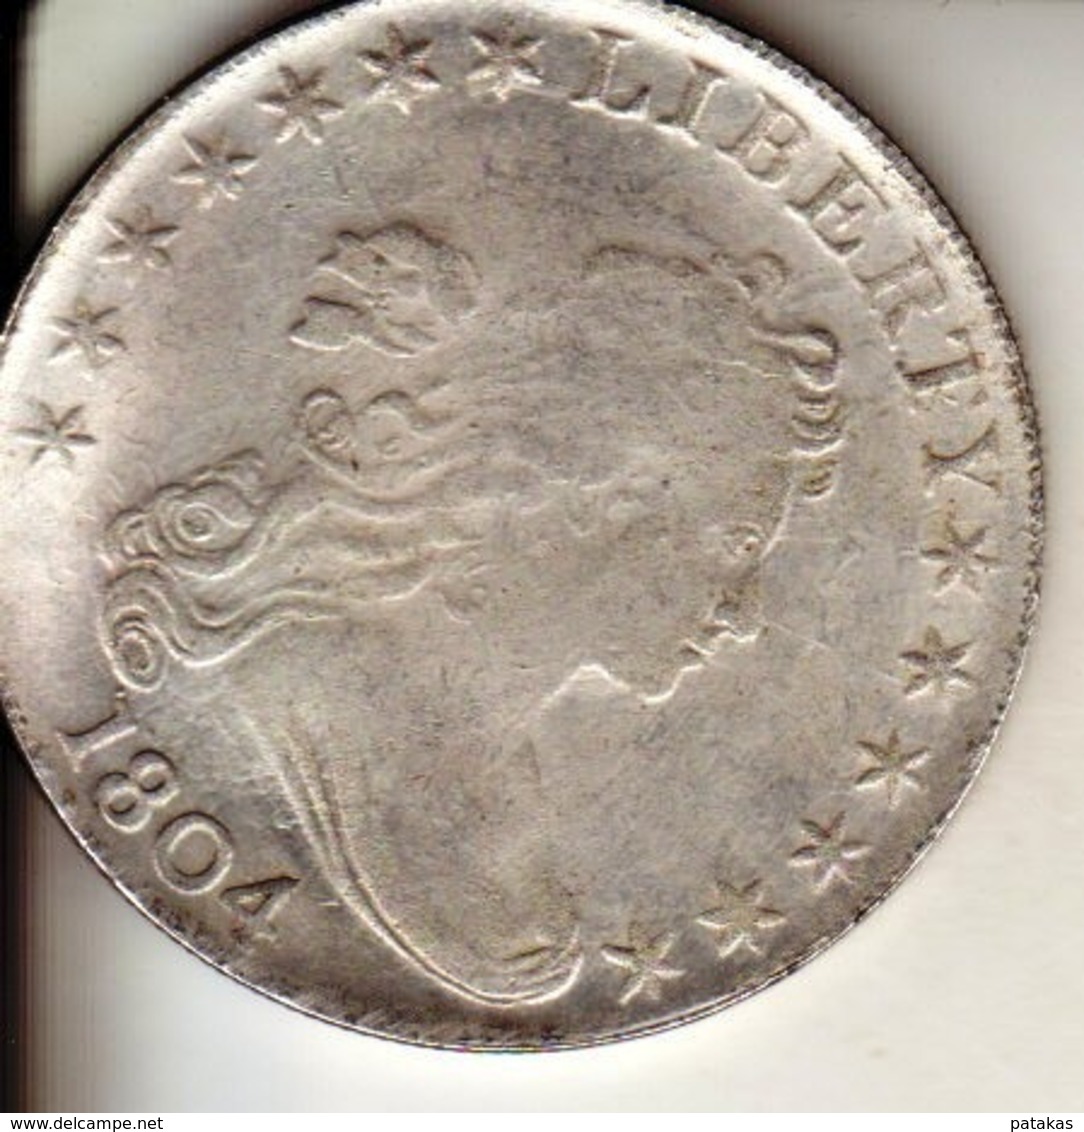 1 Dollar 1804 Fausse Pièce Aspect Argent Mais Aimantable - 1794-1804: Early Dollars